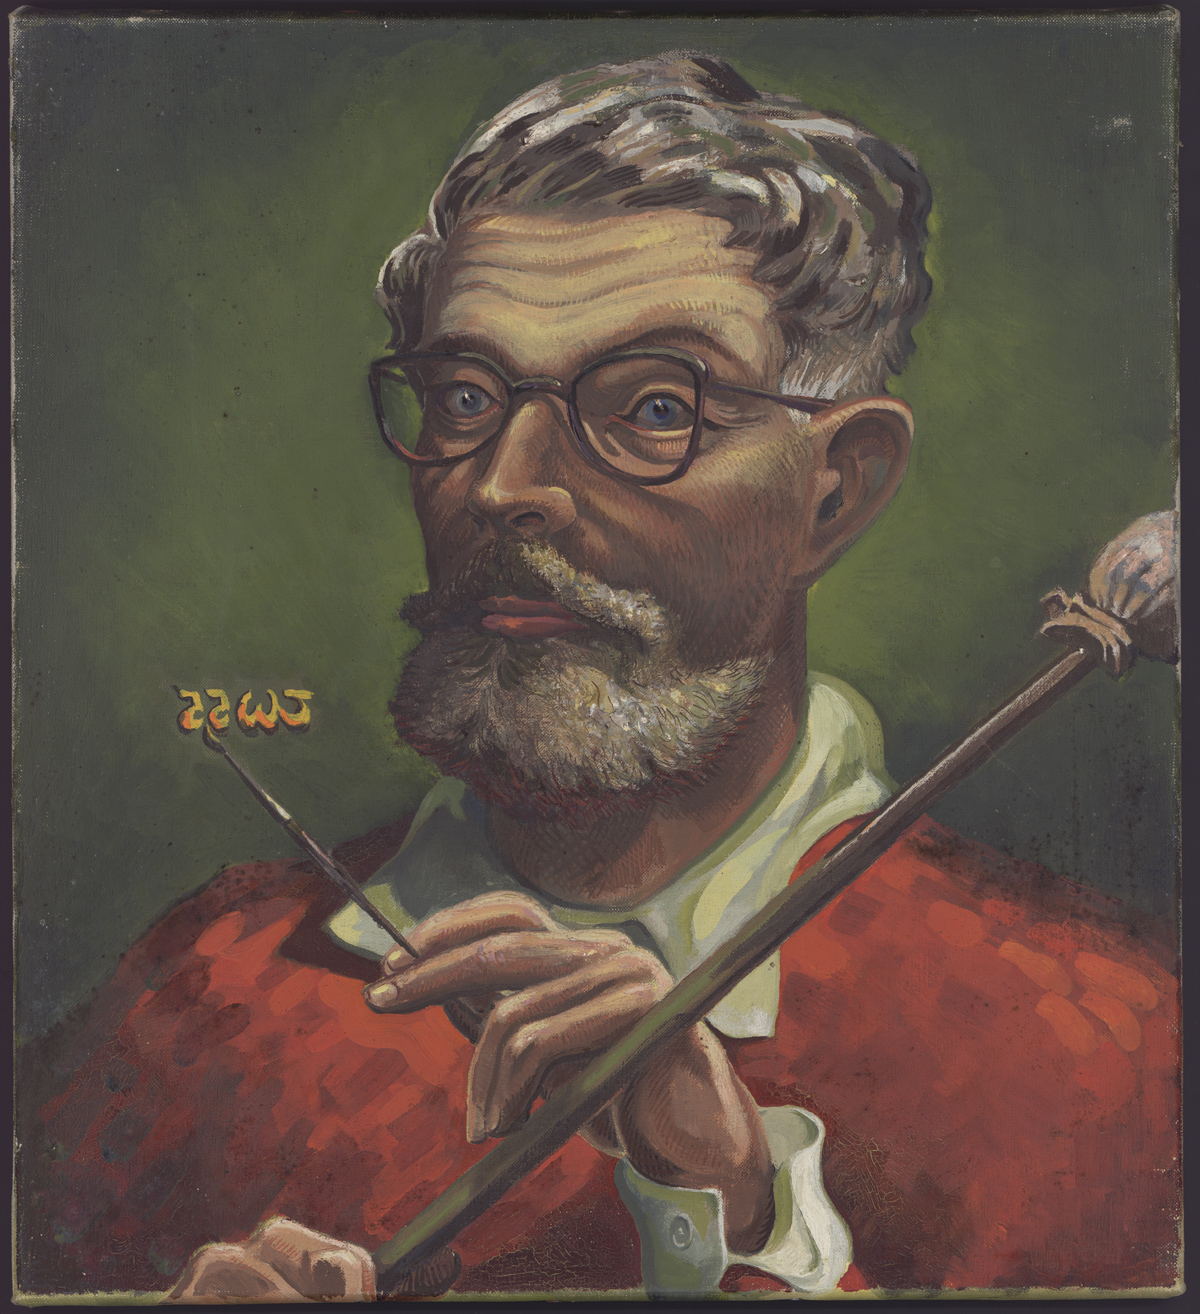 Self-portrait painted by T. H. White (1955). Several of White's other paintings are housed in the Ransom Center's art collections.